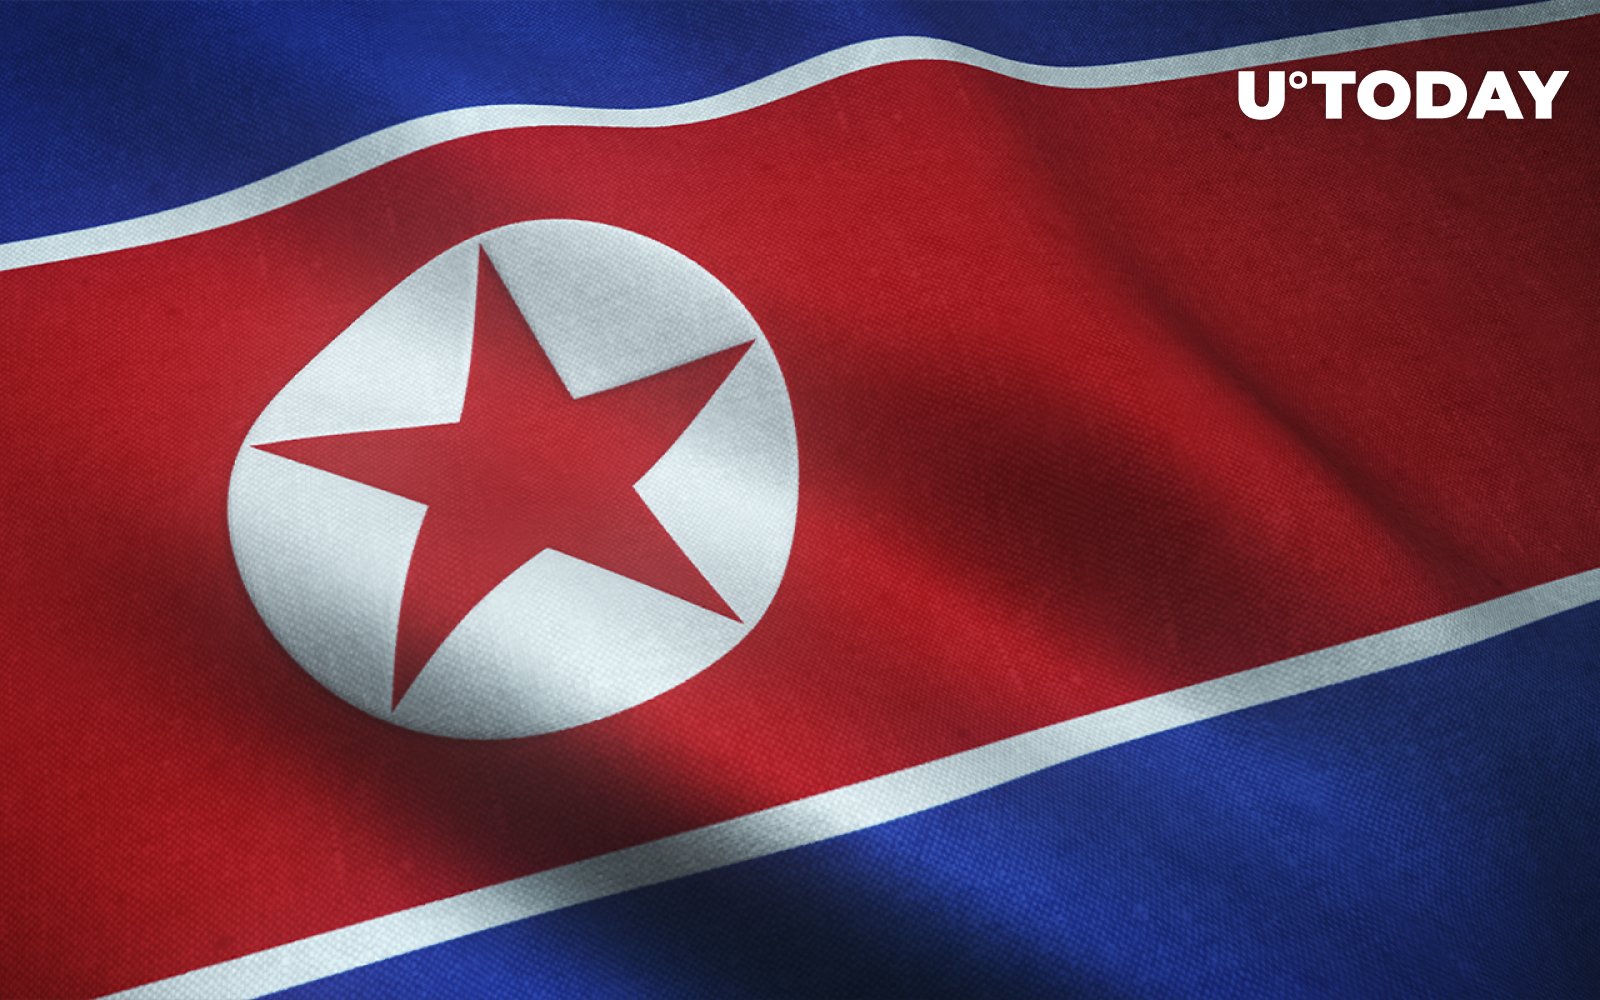 DeFi Protocol Subjected to Cyberattack by North Korea, CoFounder Says